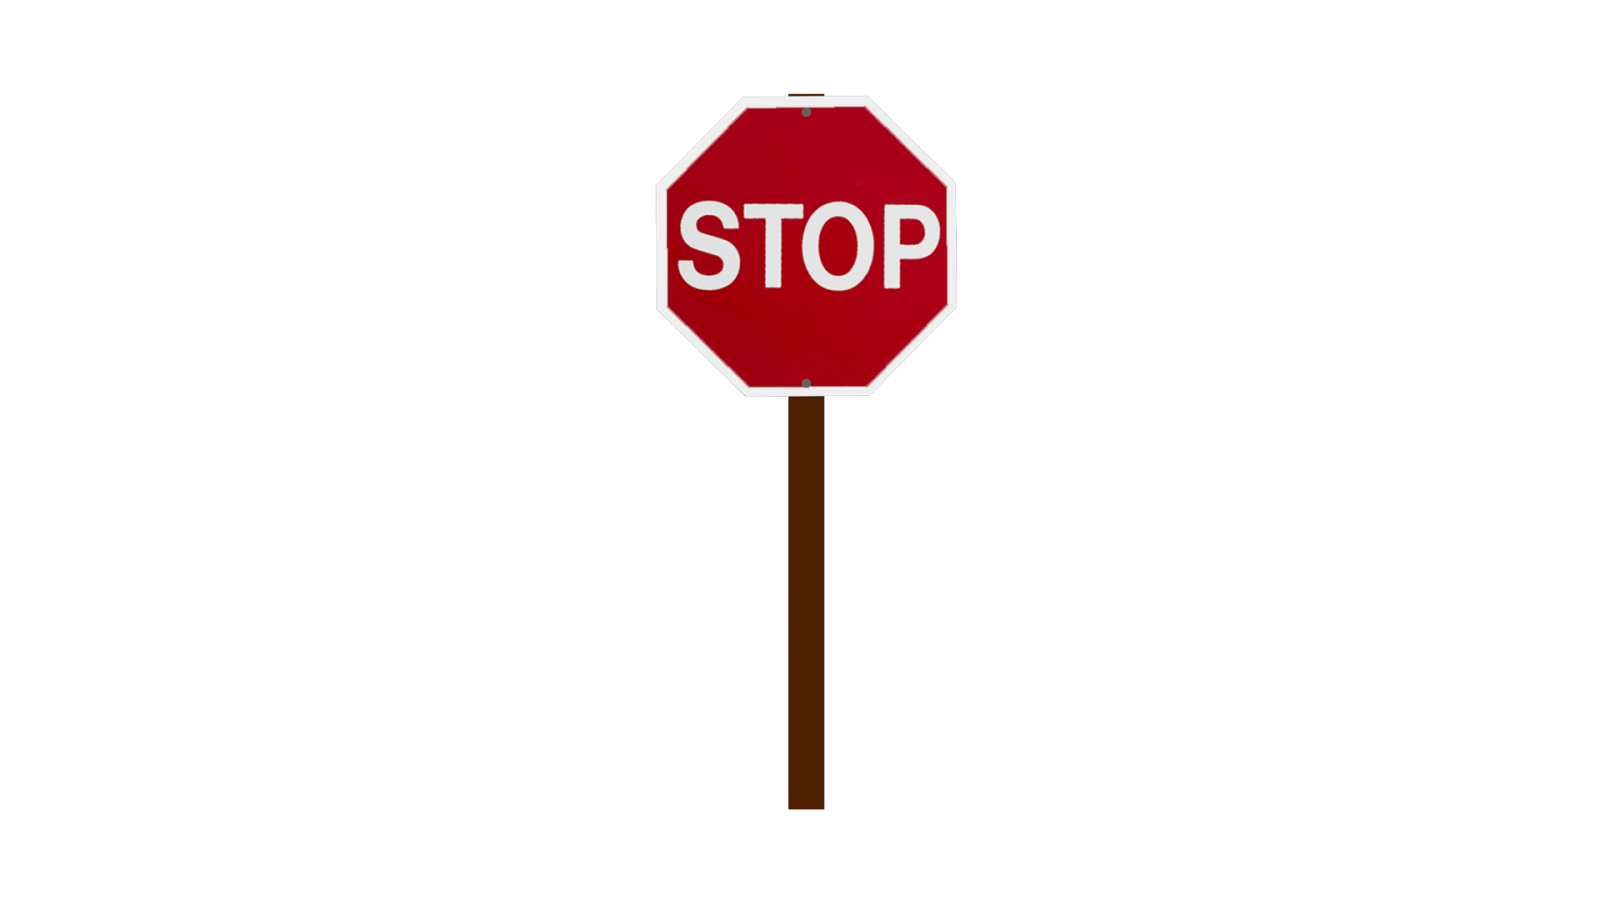 Stop Sign PNG Image File